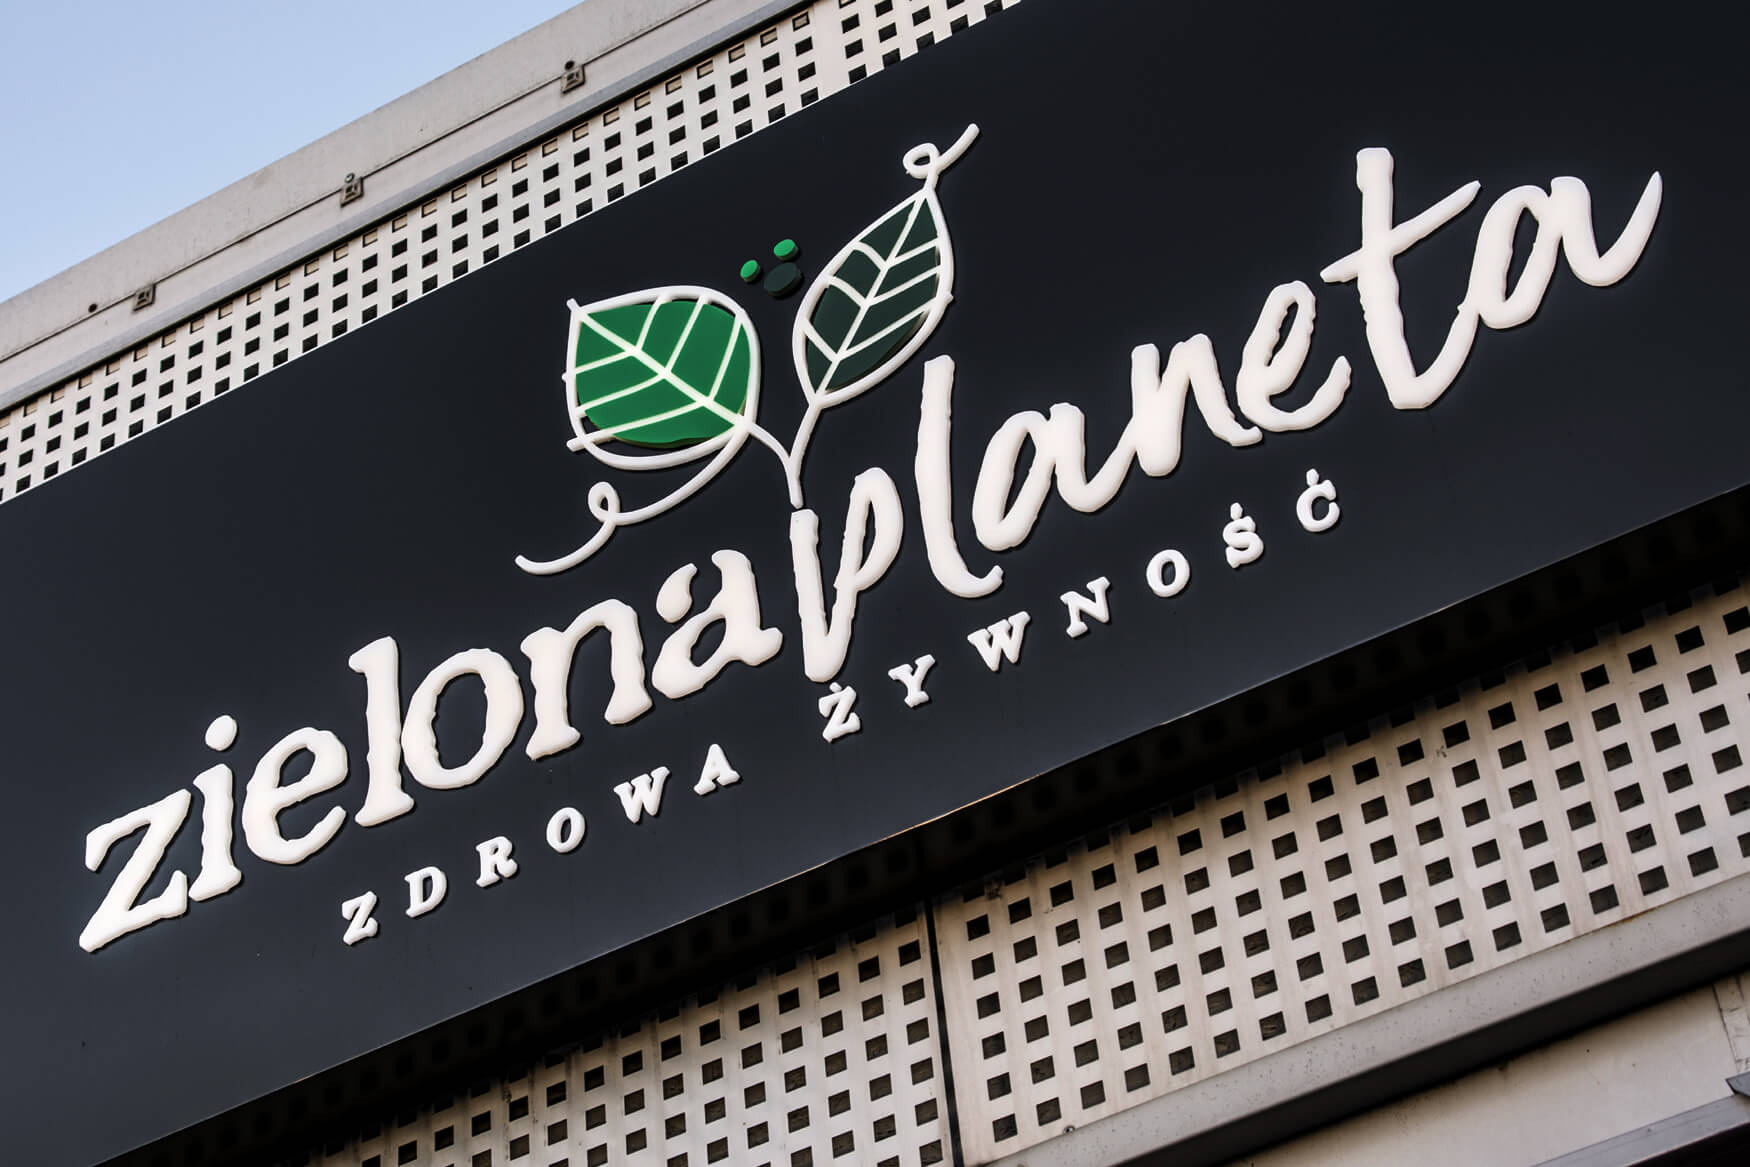 green planet - Zielona Planeta - illuminated advertising coffer with spatial letters and logo